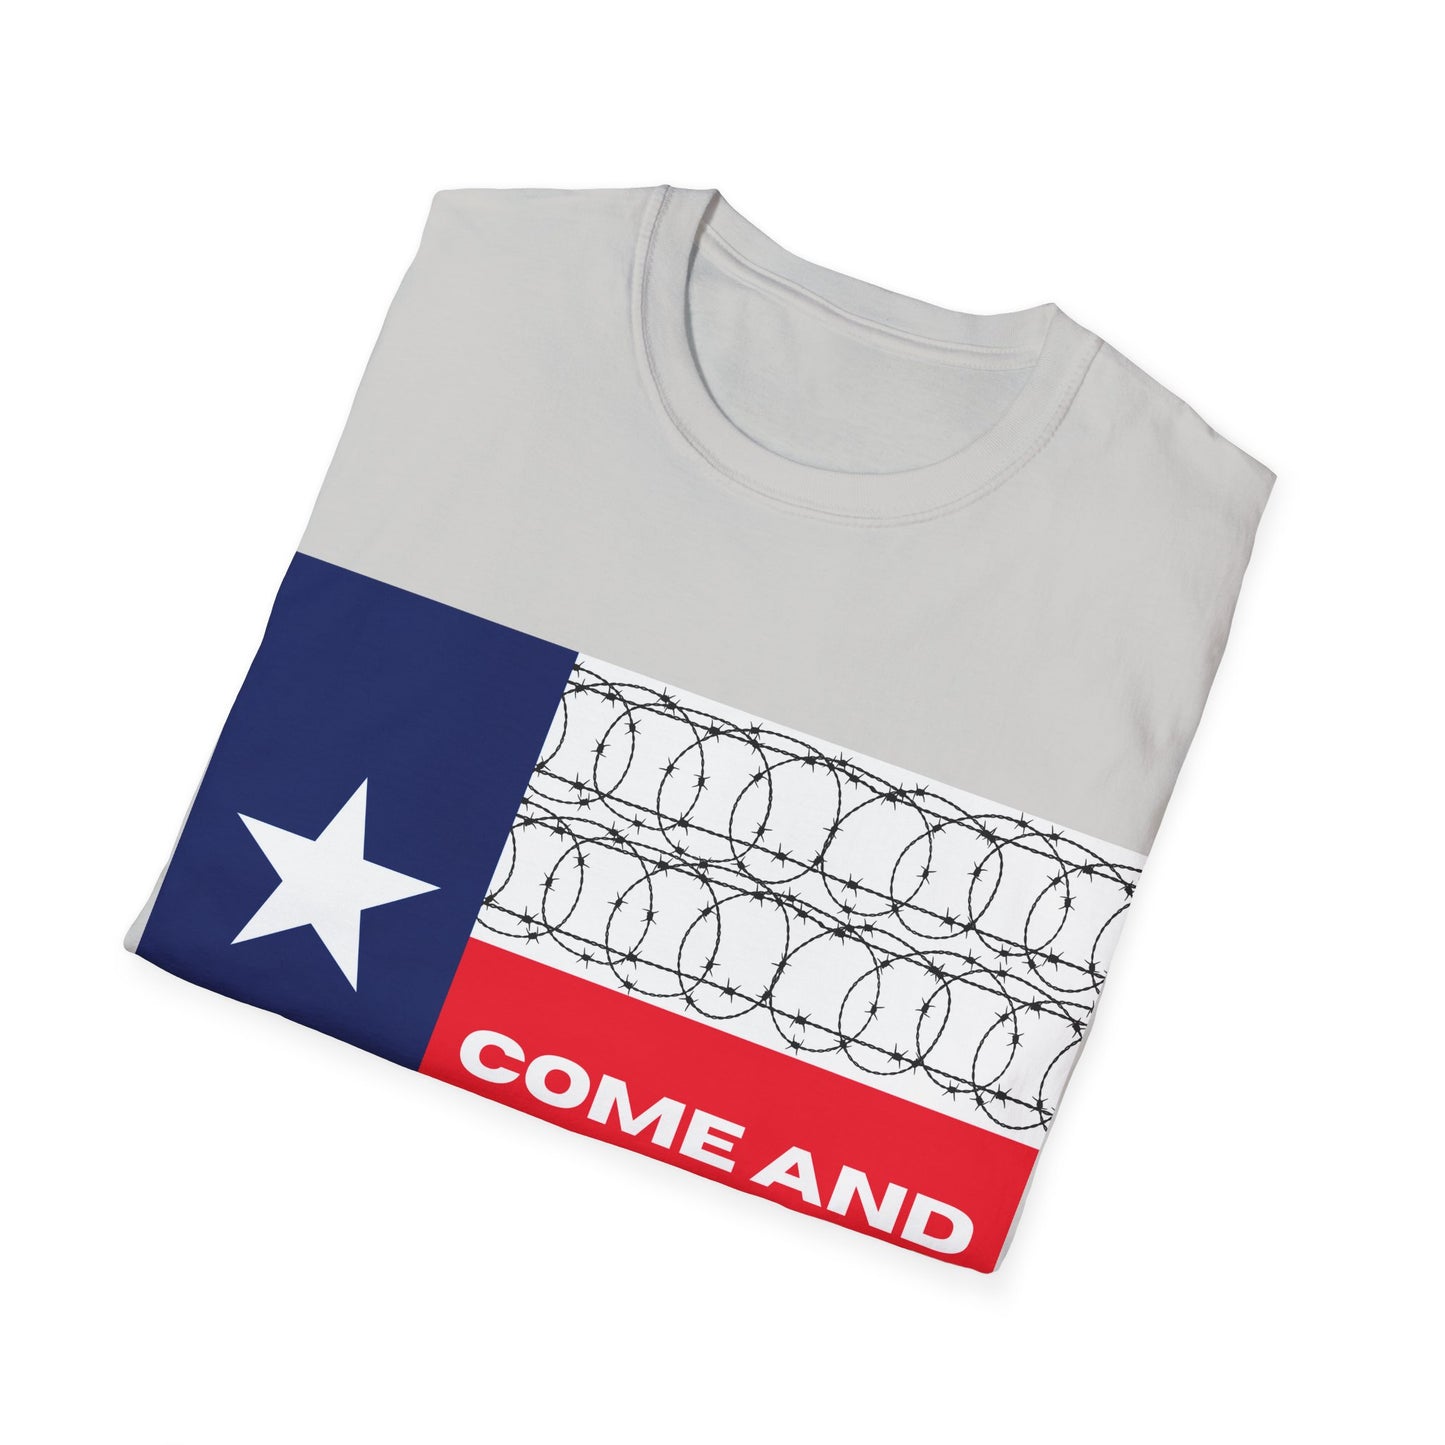 Texas Come and Cut it Softstyle T-Shirt